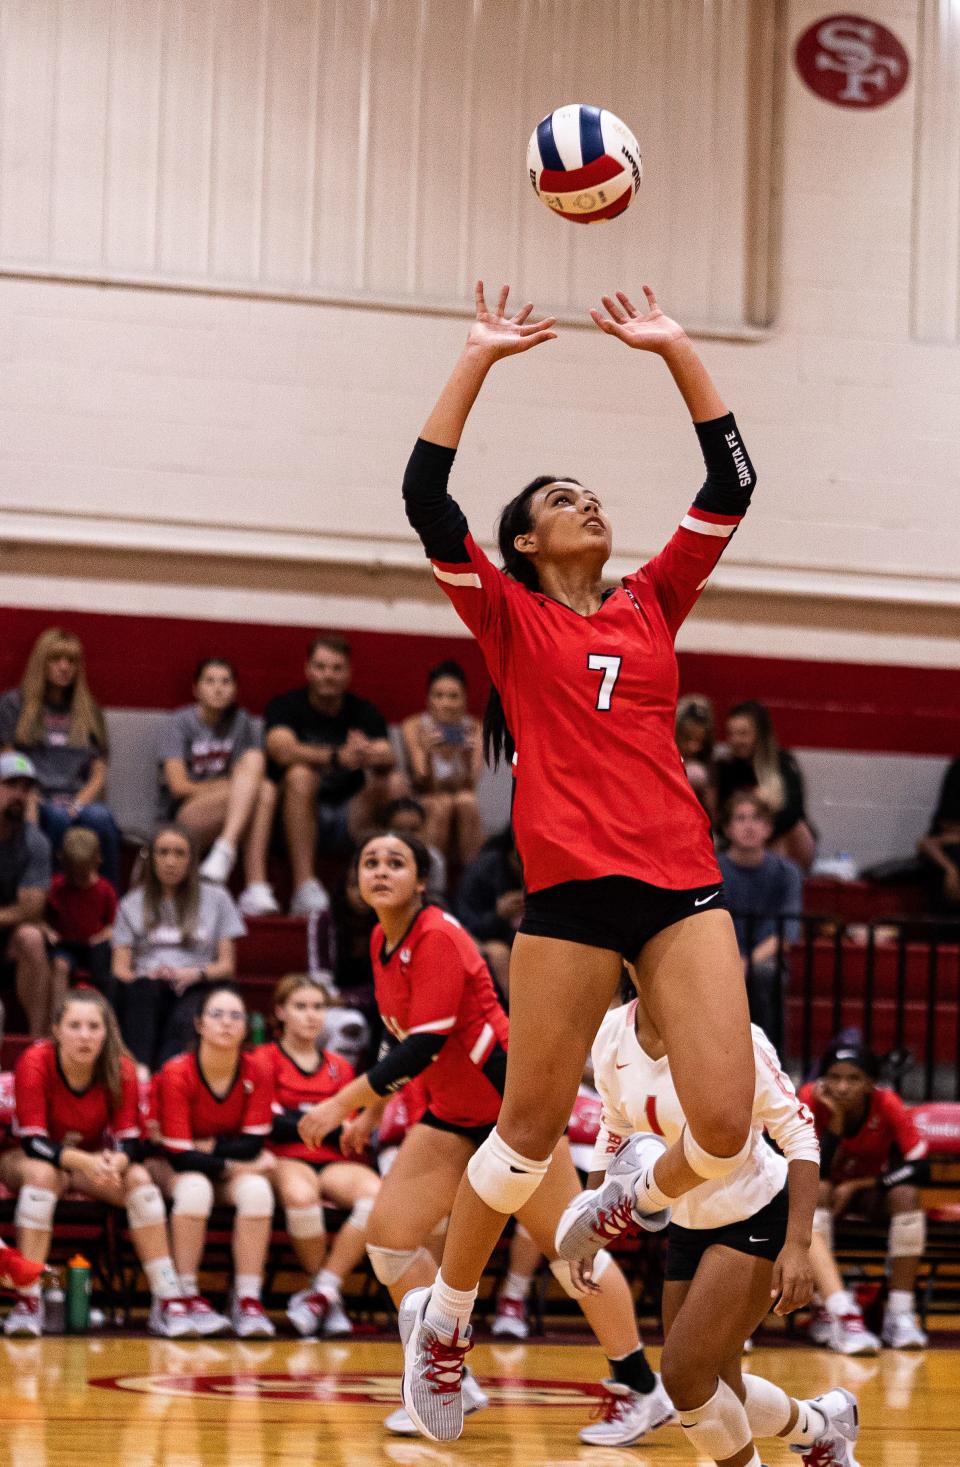 Santa Fe's Jalyn Stout (7) sets the ball against Florida State High School during their game in Alachua, on Thursday, Sept. 22, 2022.